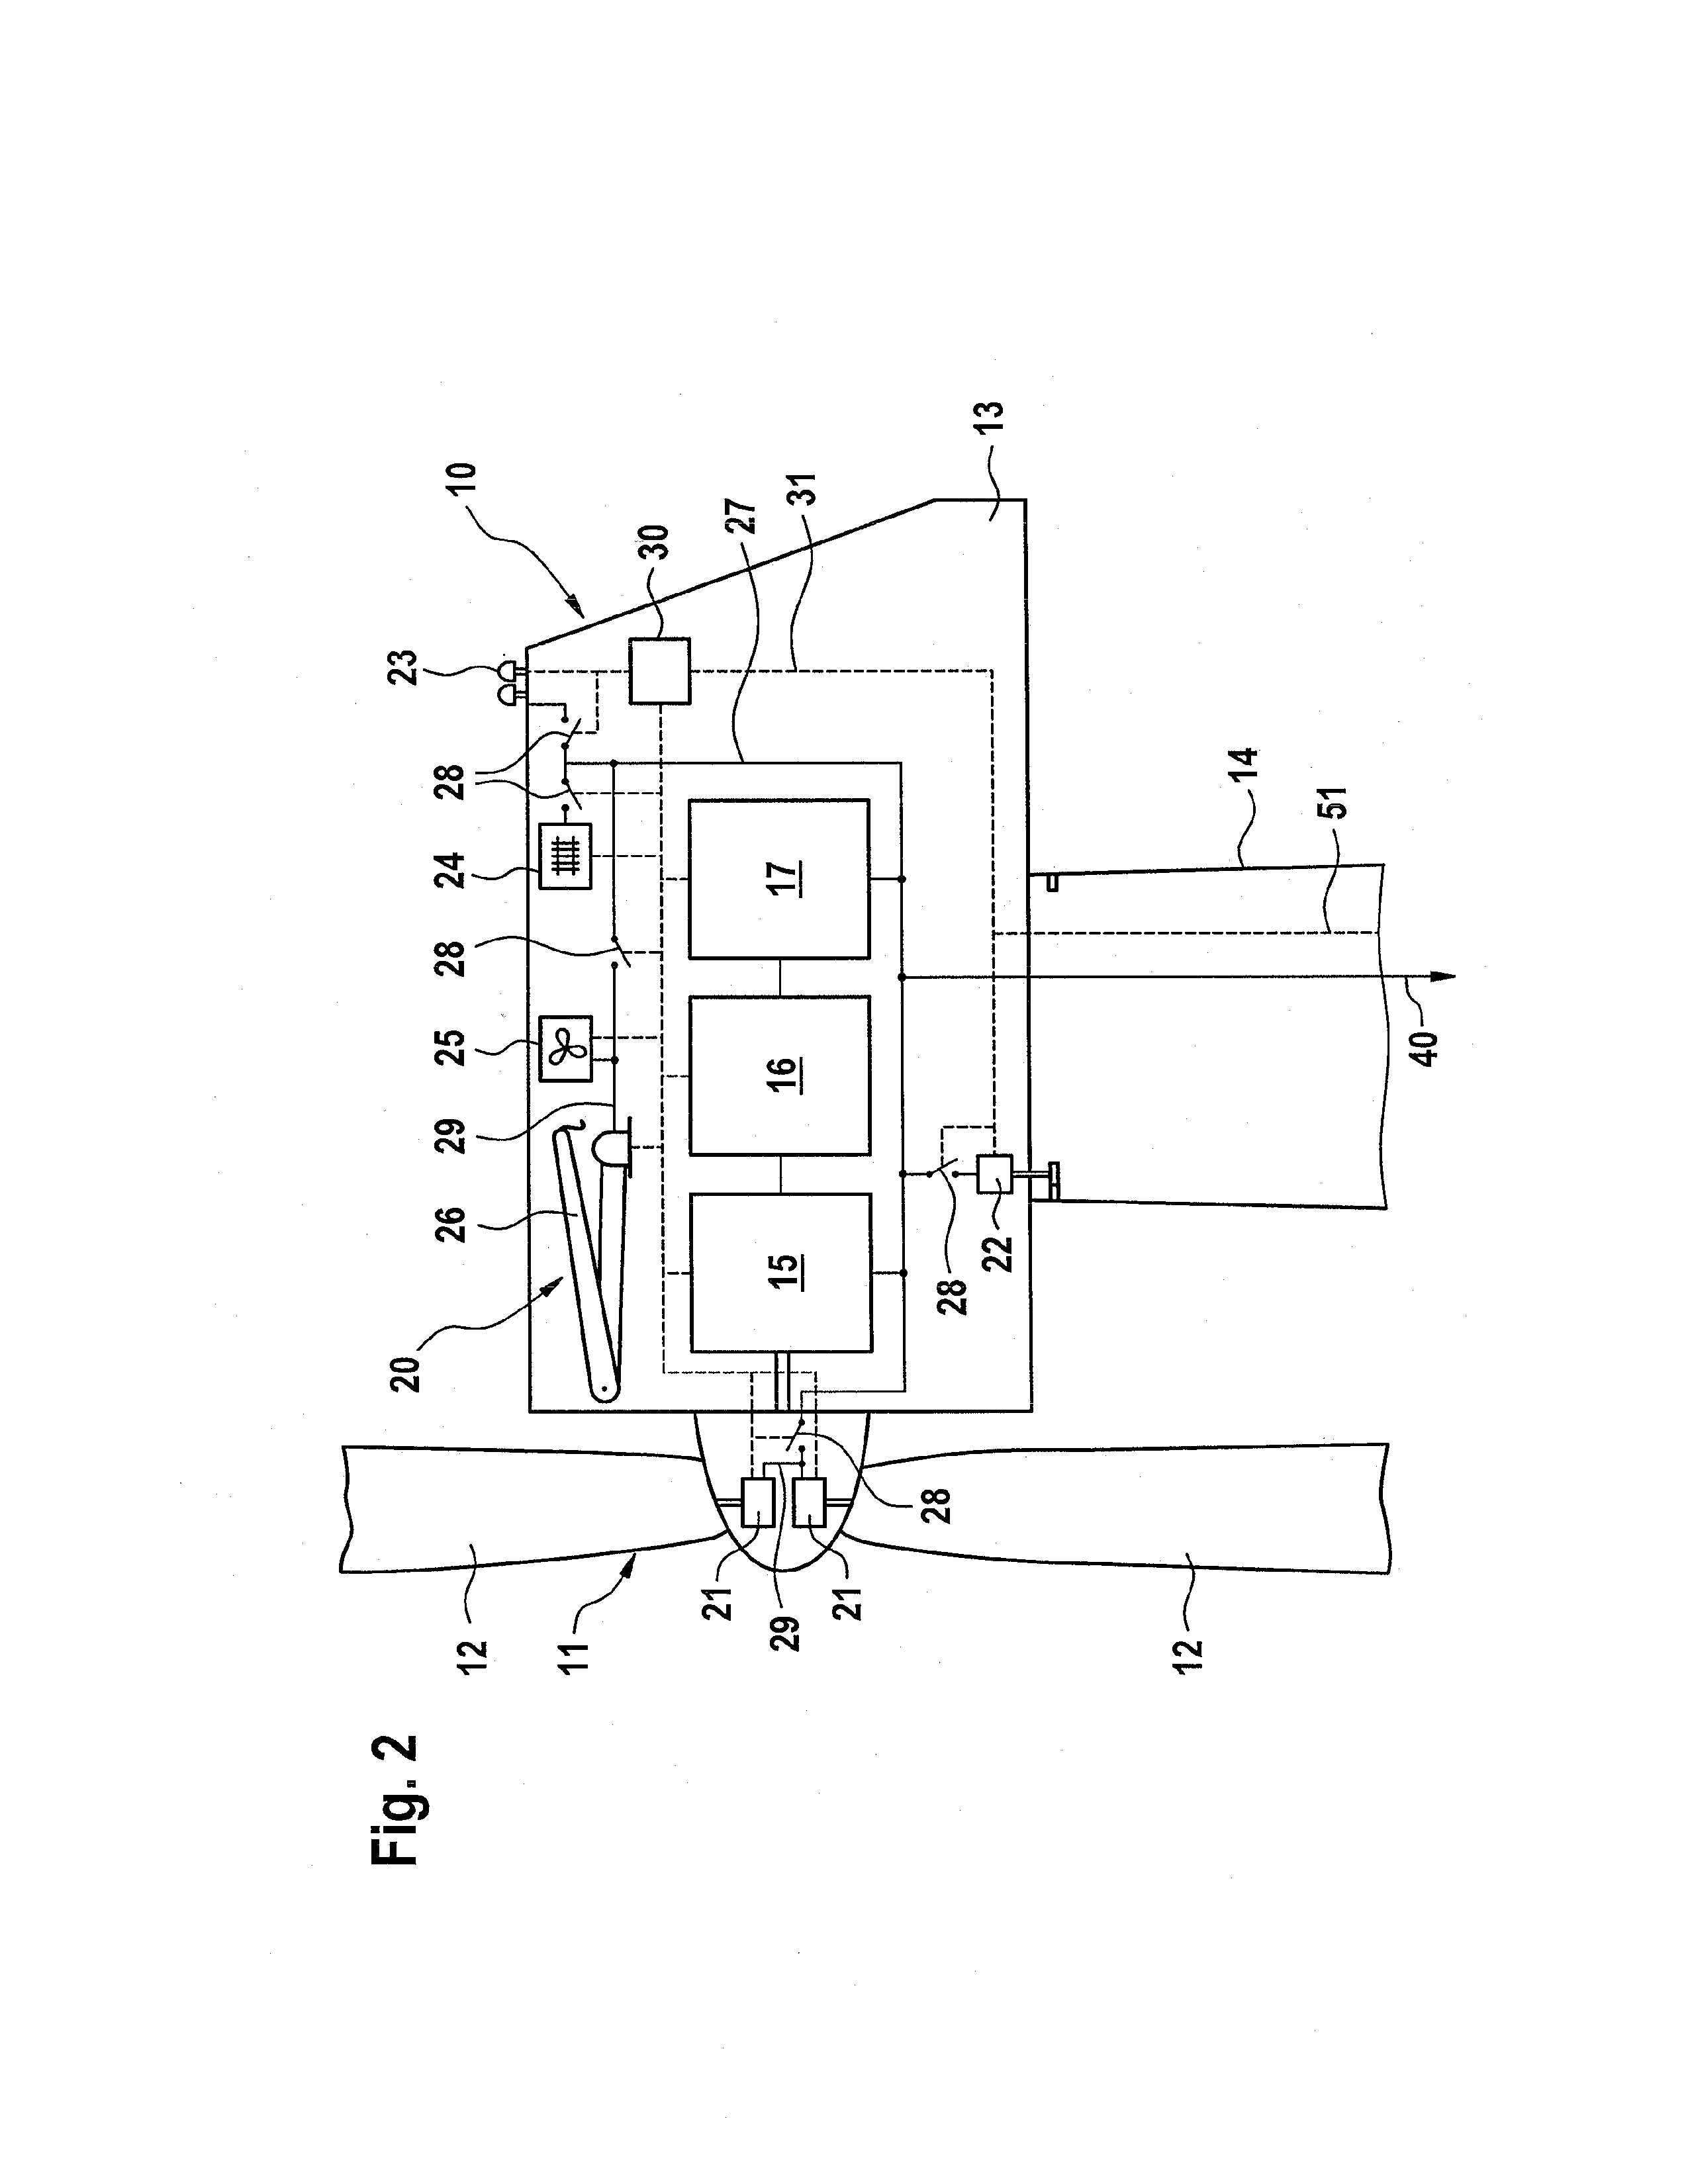 Wind farm and method for operating a wind farm